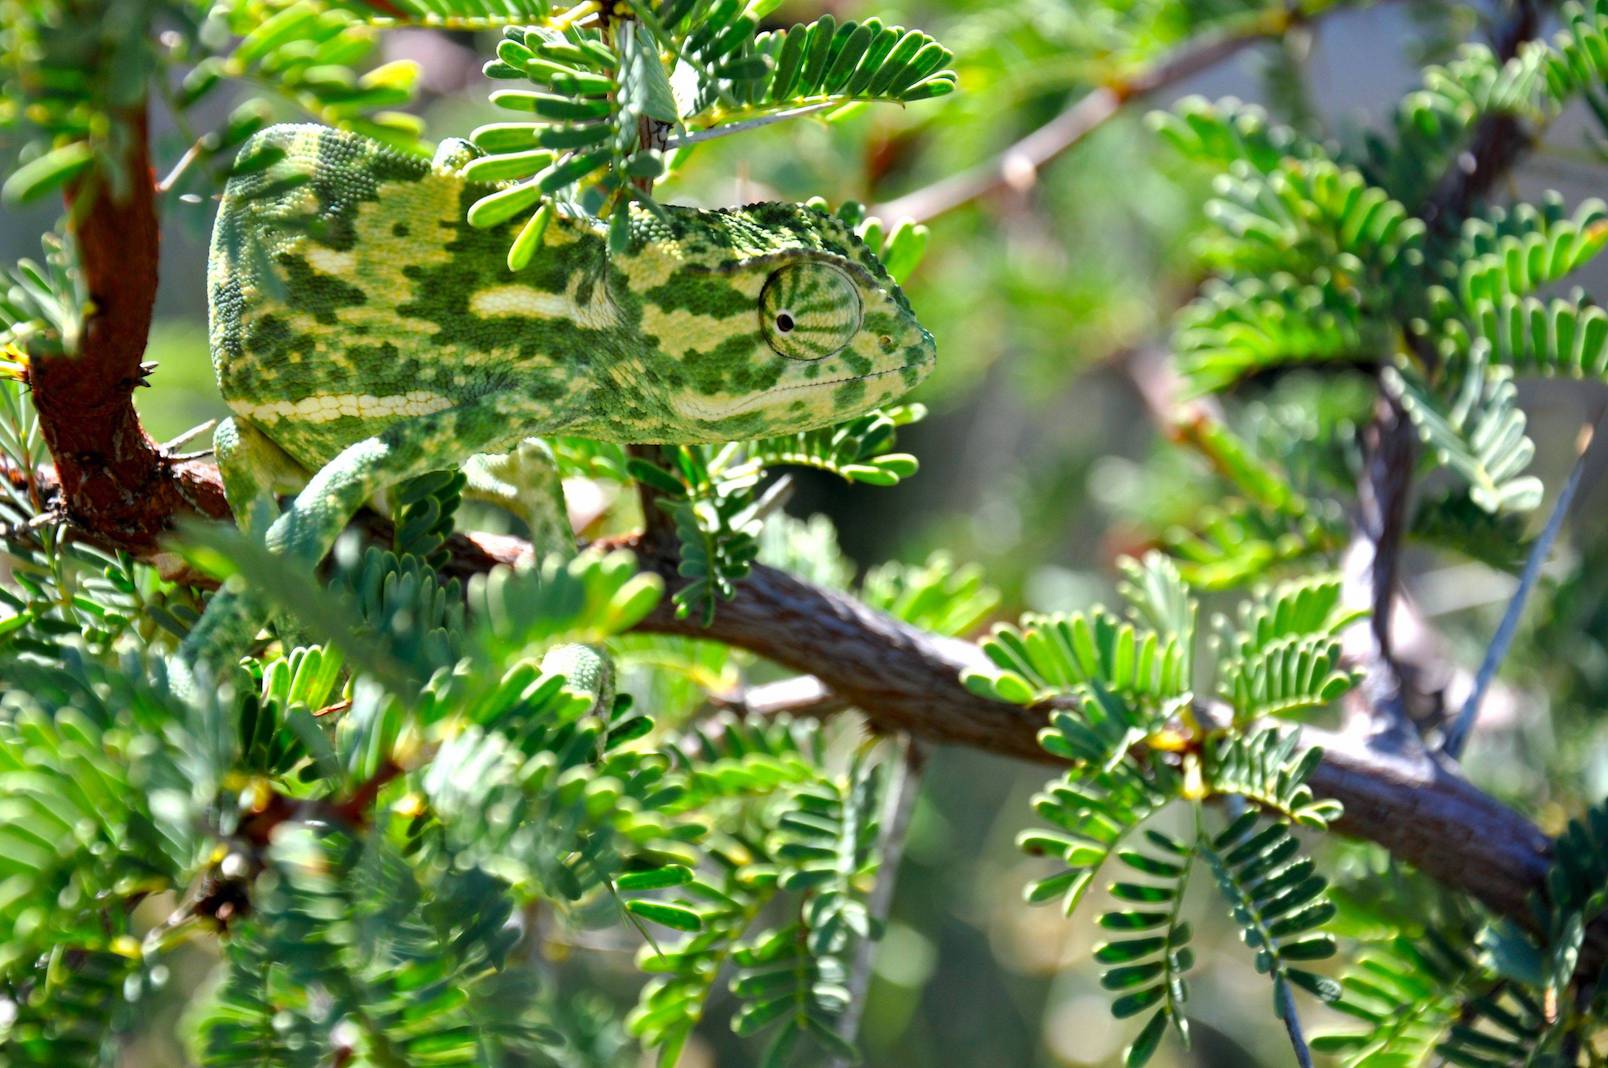 chameleon camouflage in the tree | Galliot Adaptive Learning Computer vision